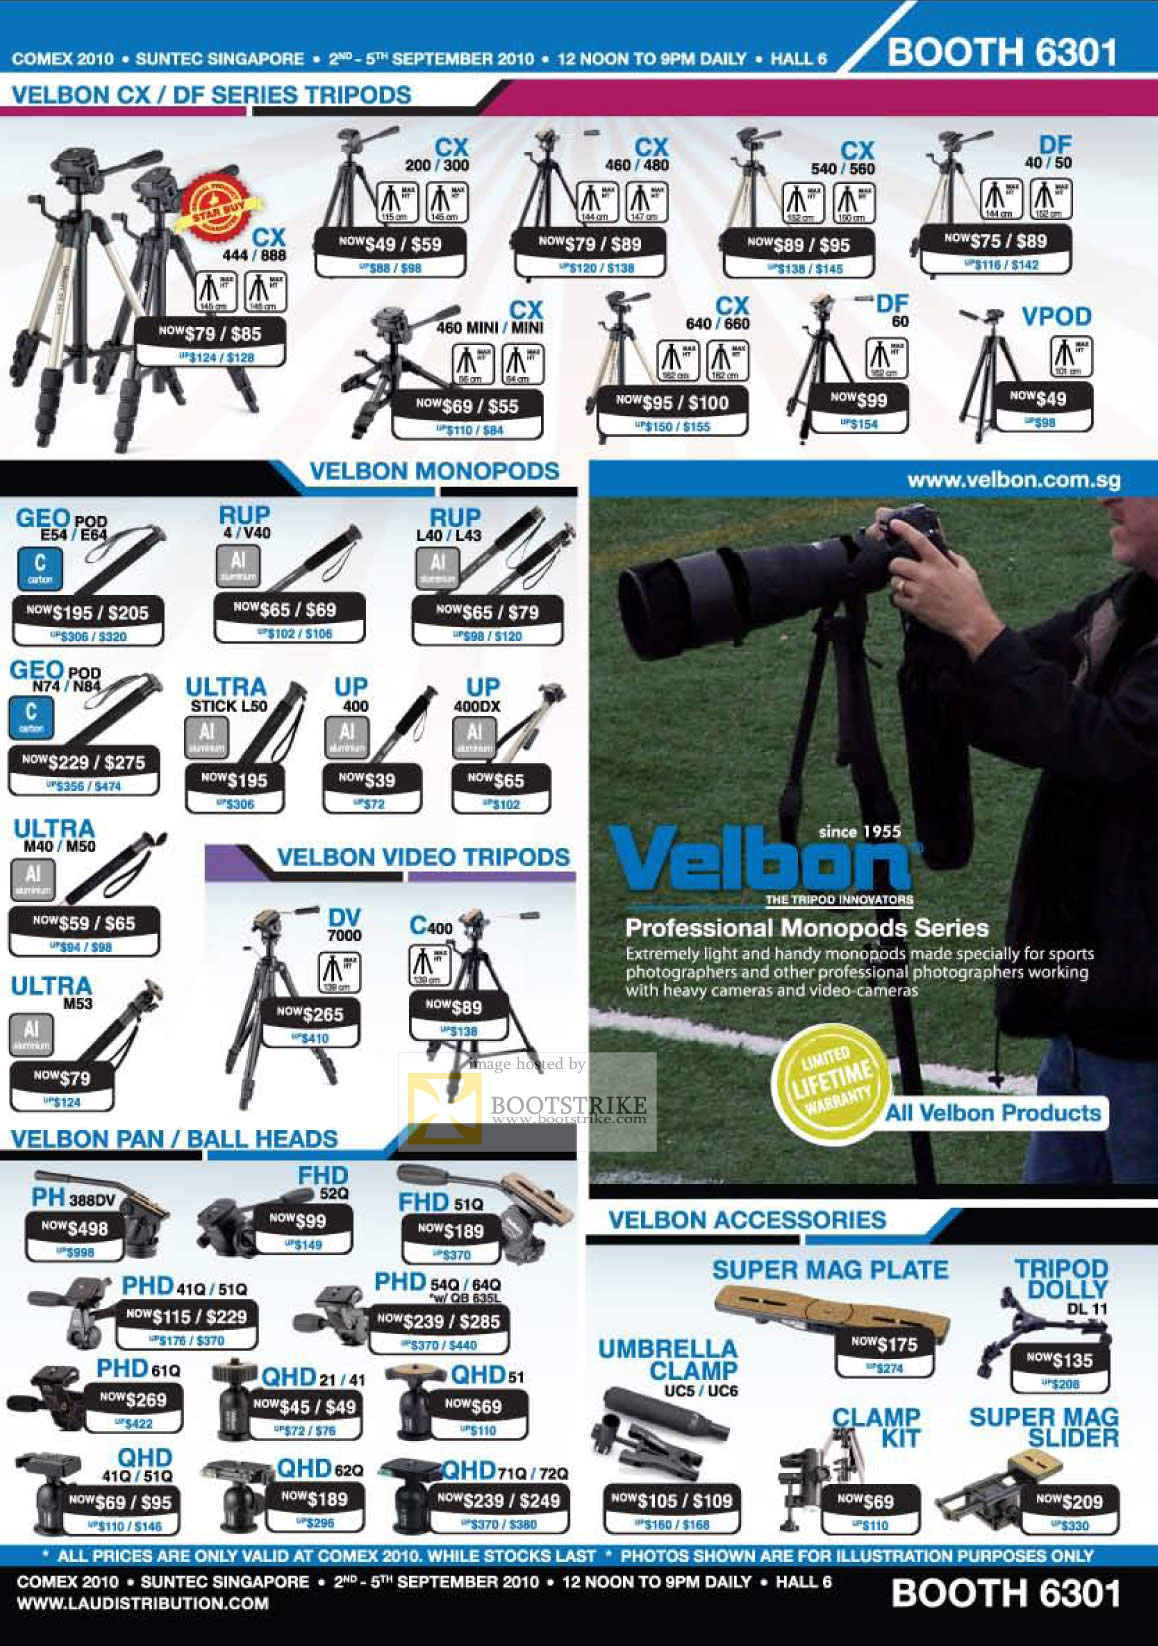 Comex 2010 price list image brochure of Lau Intl Velbon Tripods CX DF Monopods GEO RUP UP ULTRA Ball Heads Accessories Mag Plate Umbrella Clamp